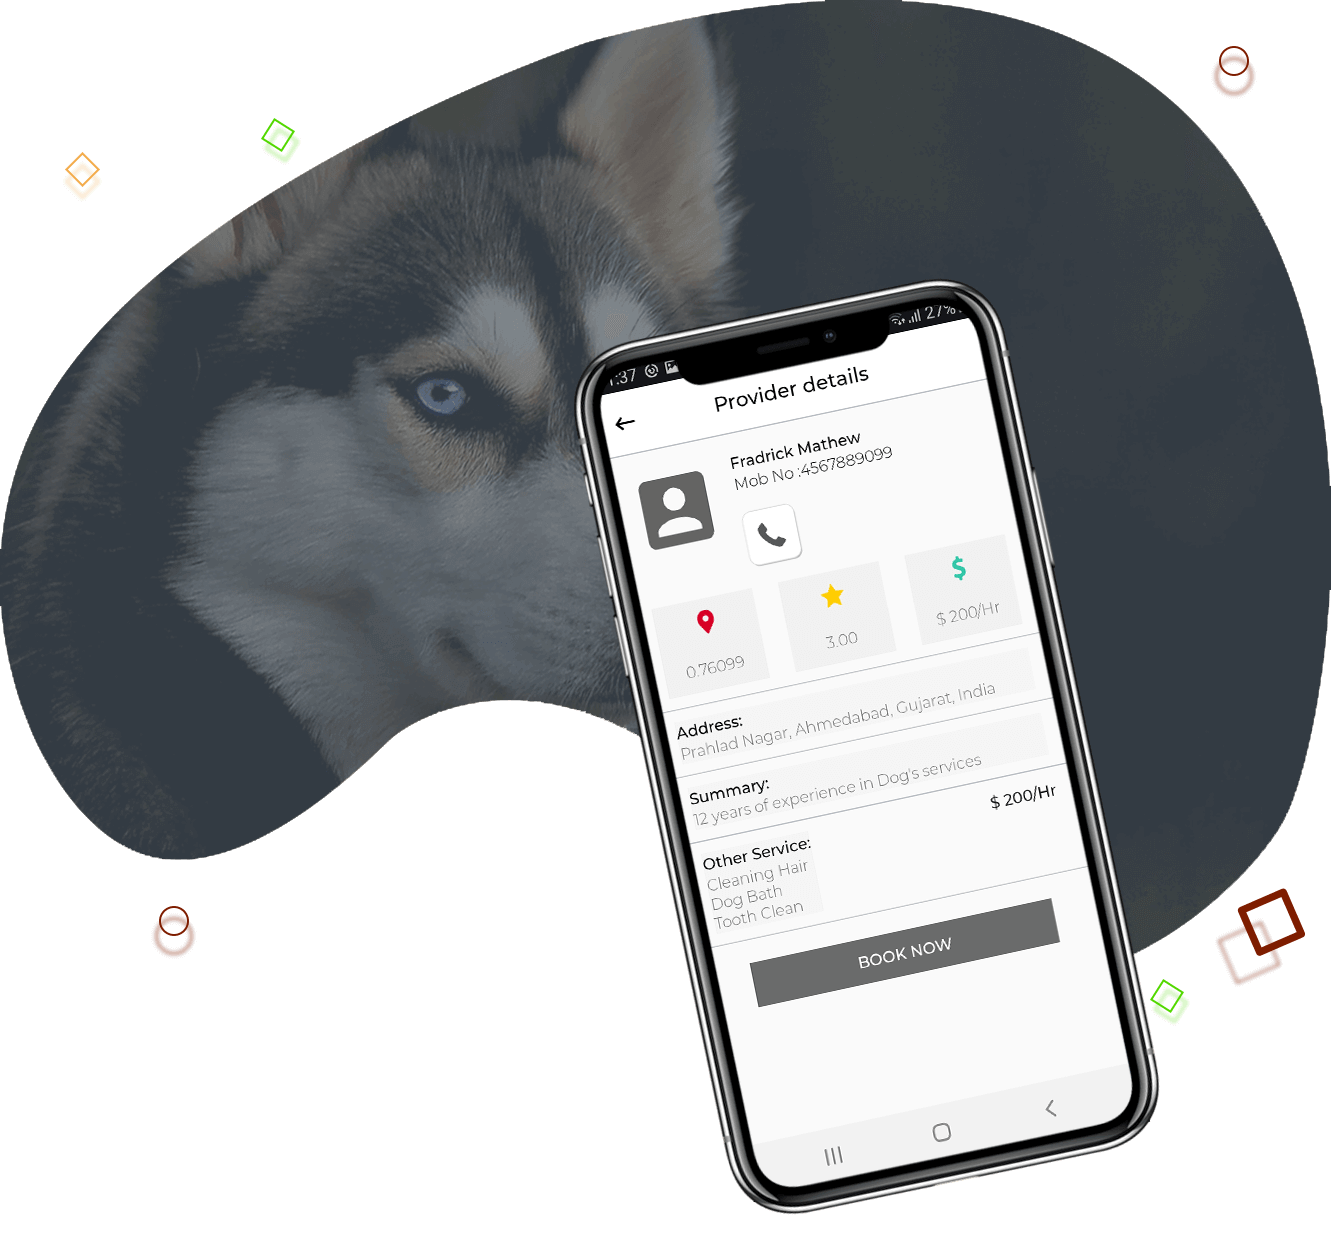 Using On-Demand Technologies in uber for dog walking